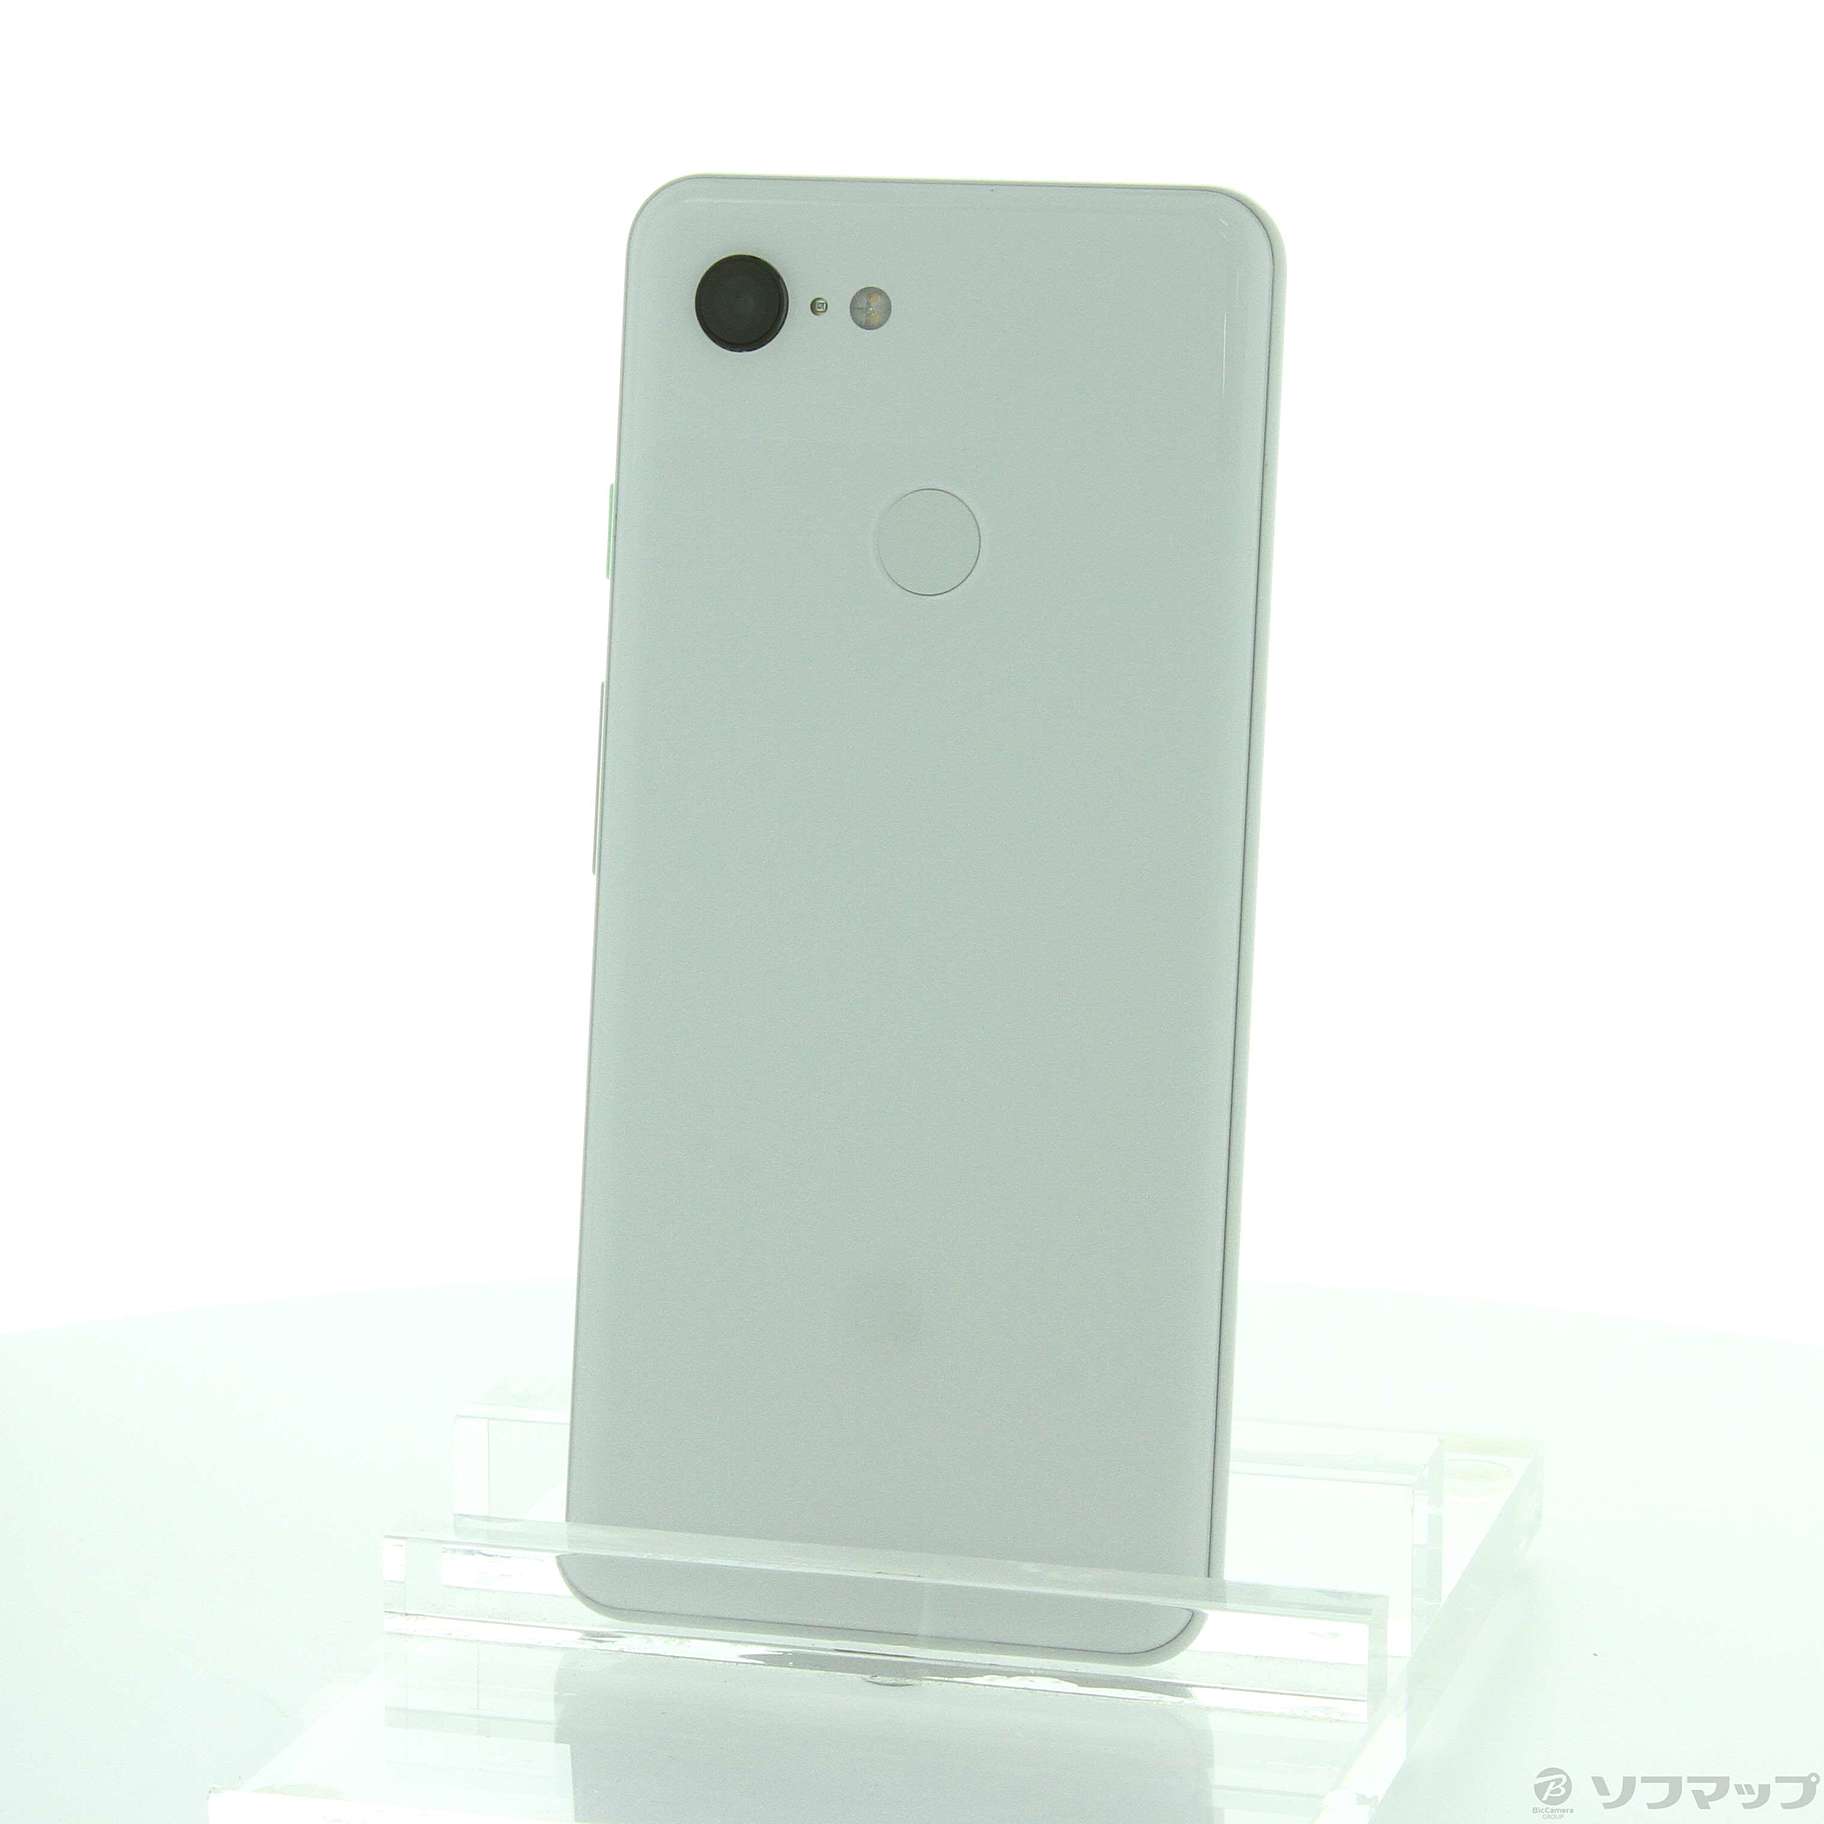 Pixel3 64GB Clearly White